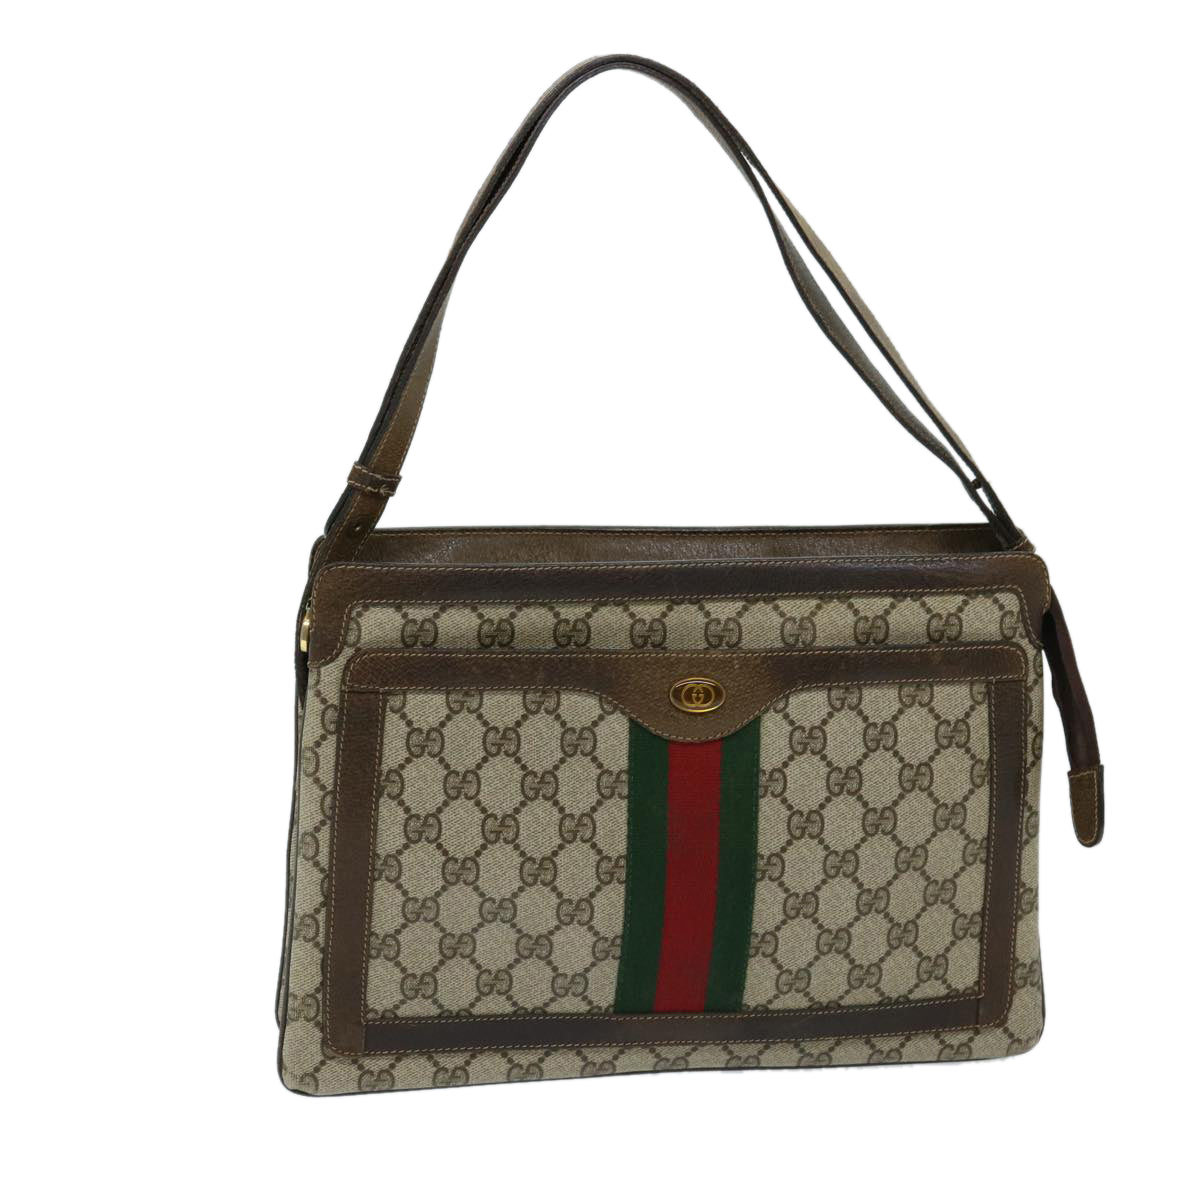 GUCCI GG Supreme Web Sherry Line Shoulder Bag Beige Red Green Auth ep3747